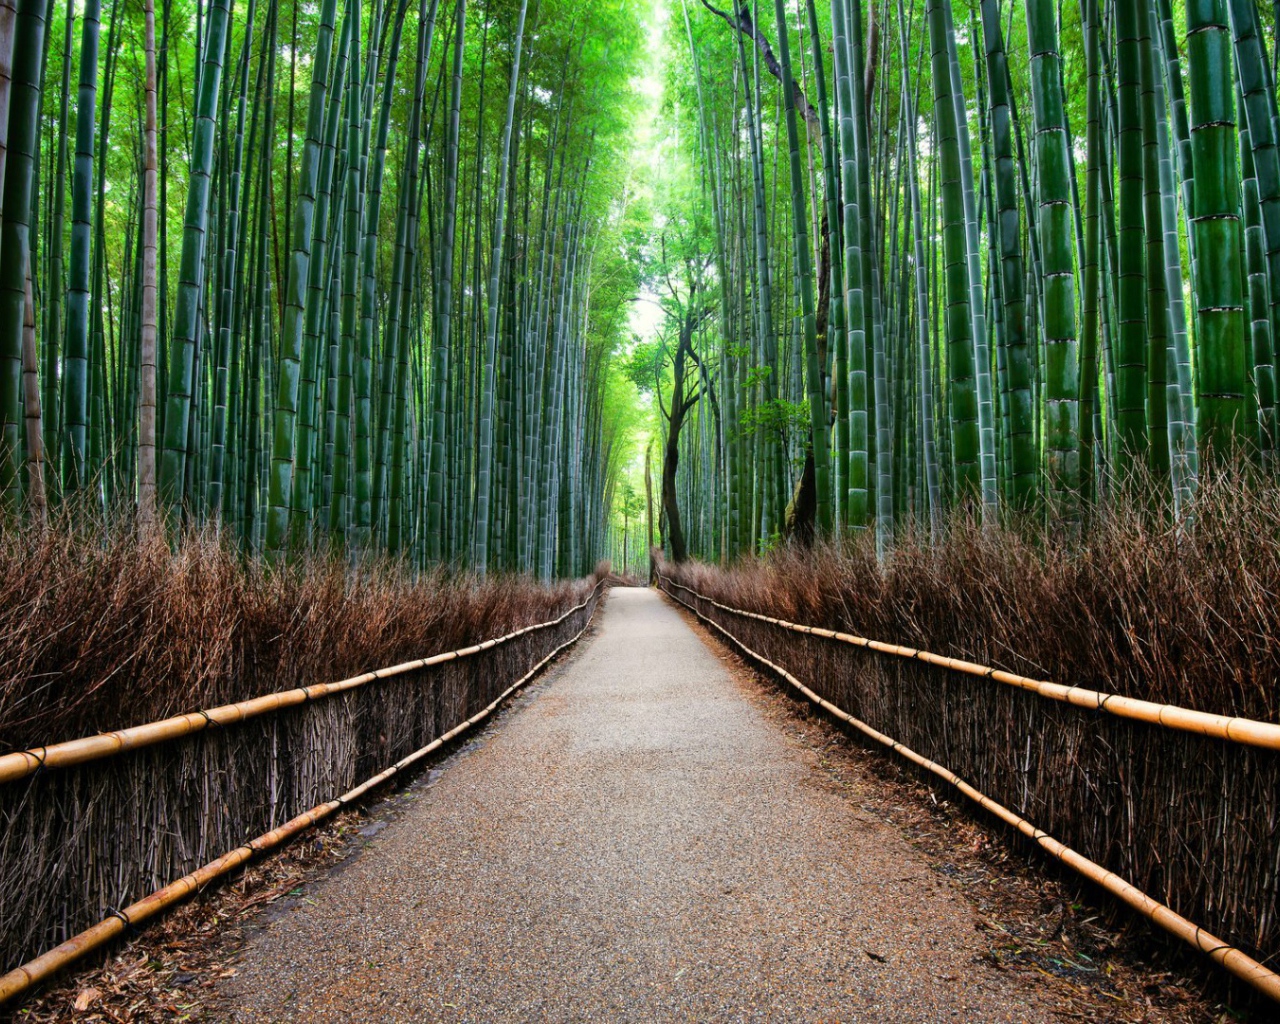 Sagano Bamboo Forest in Kyoto, Japan